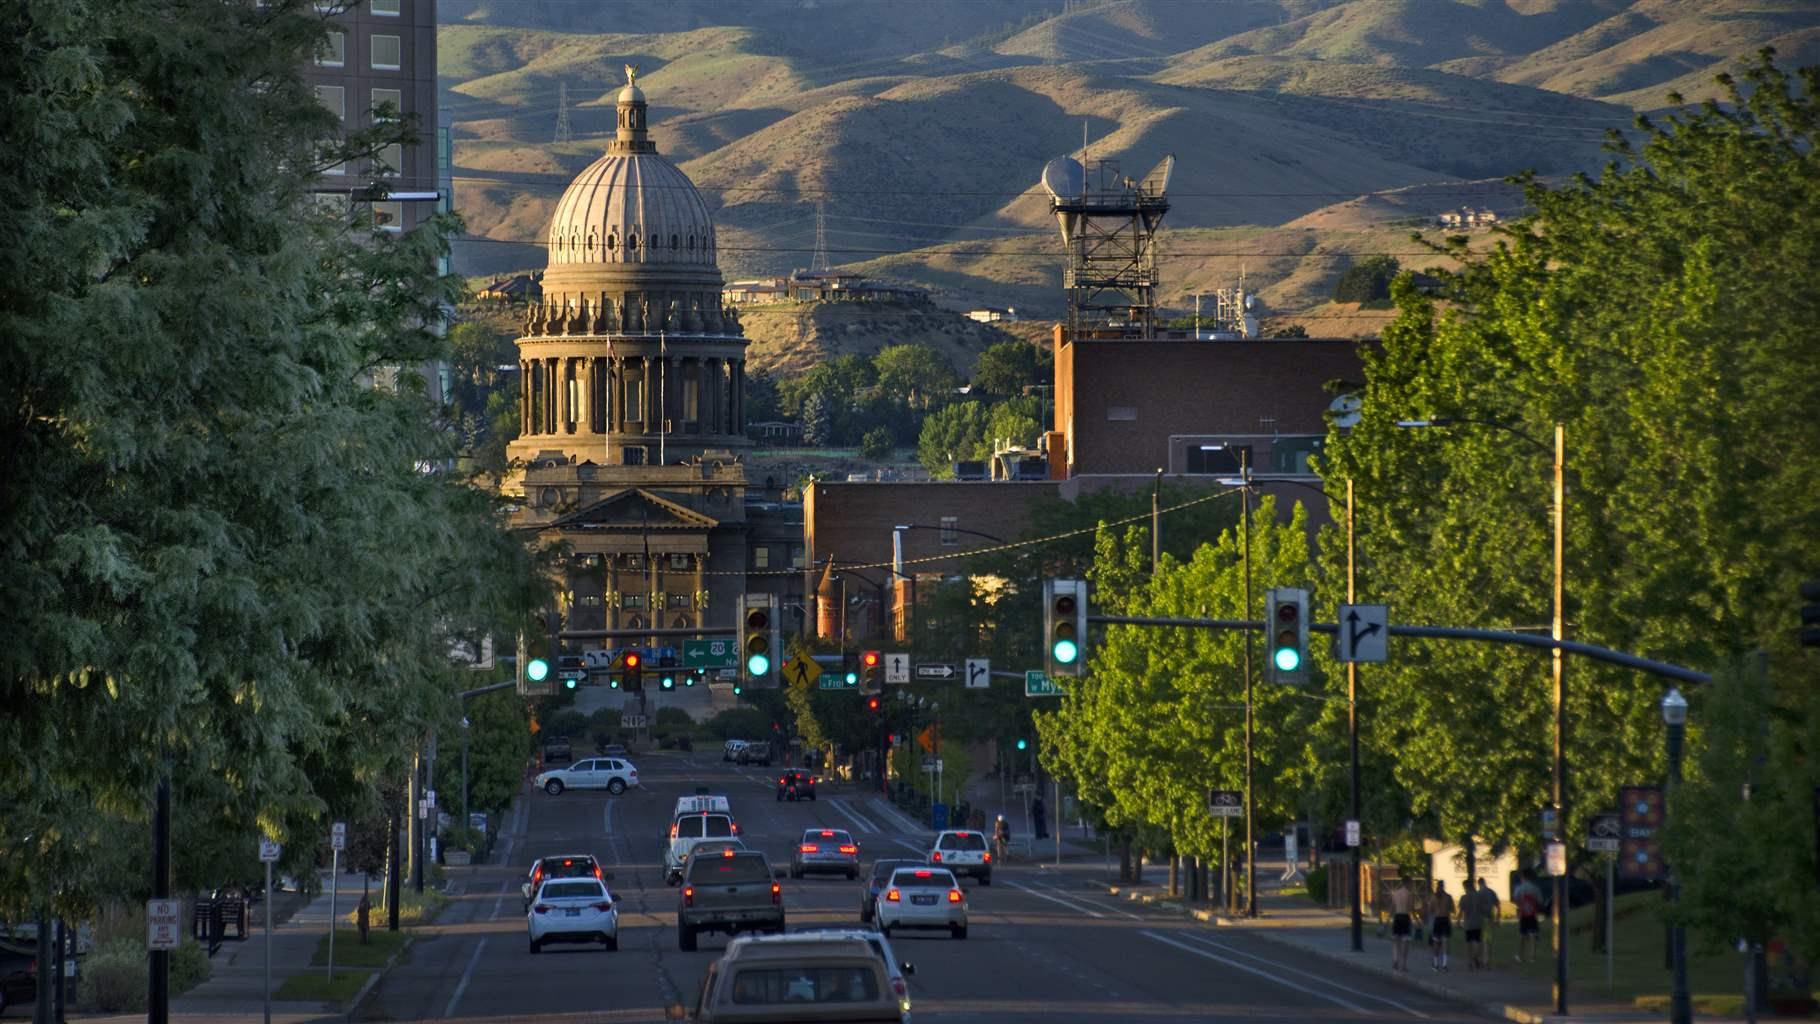 Capitol building in Boise, Idaho